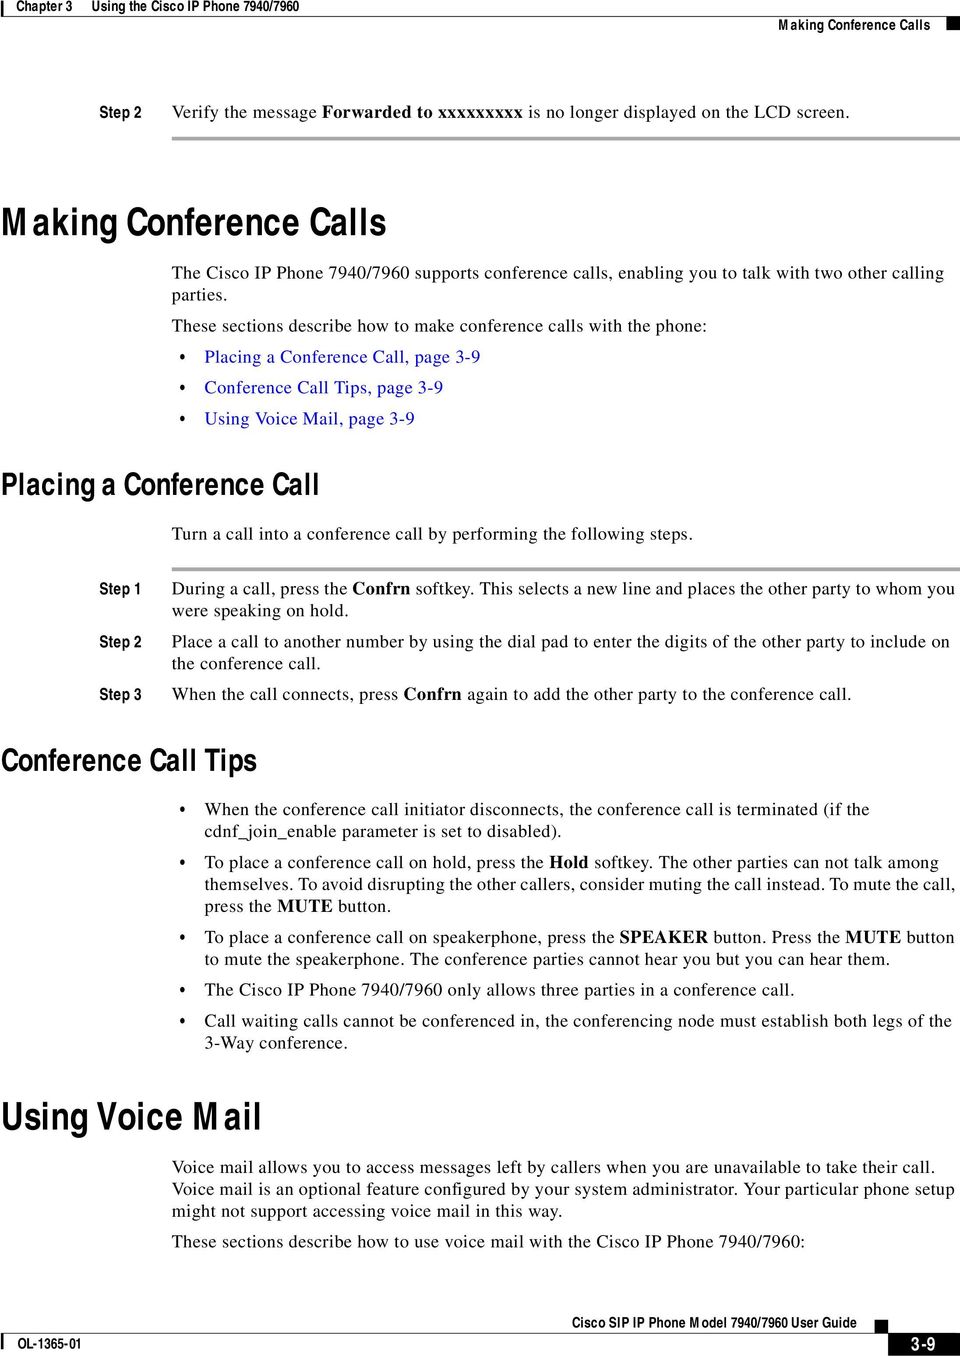 These sections describe how to make conference calls with the phone: Placing a Conference Call, page 3-9 Conference Call Tips, page 3-9 Using Voice Mail, page 3-9 Placing a Conference Call Turn a